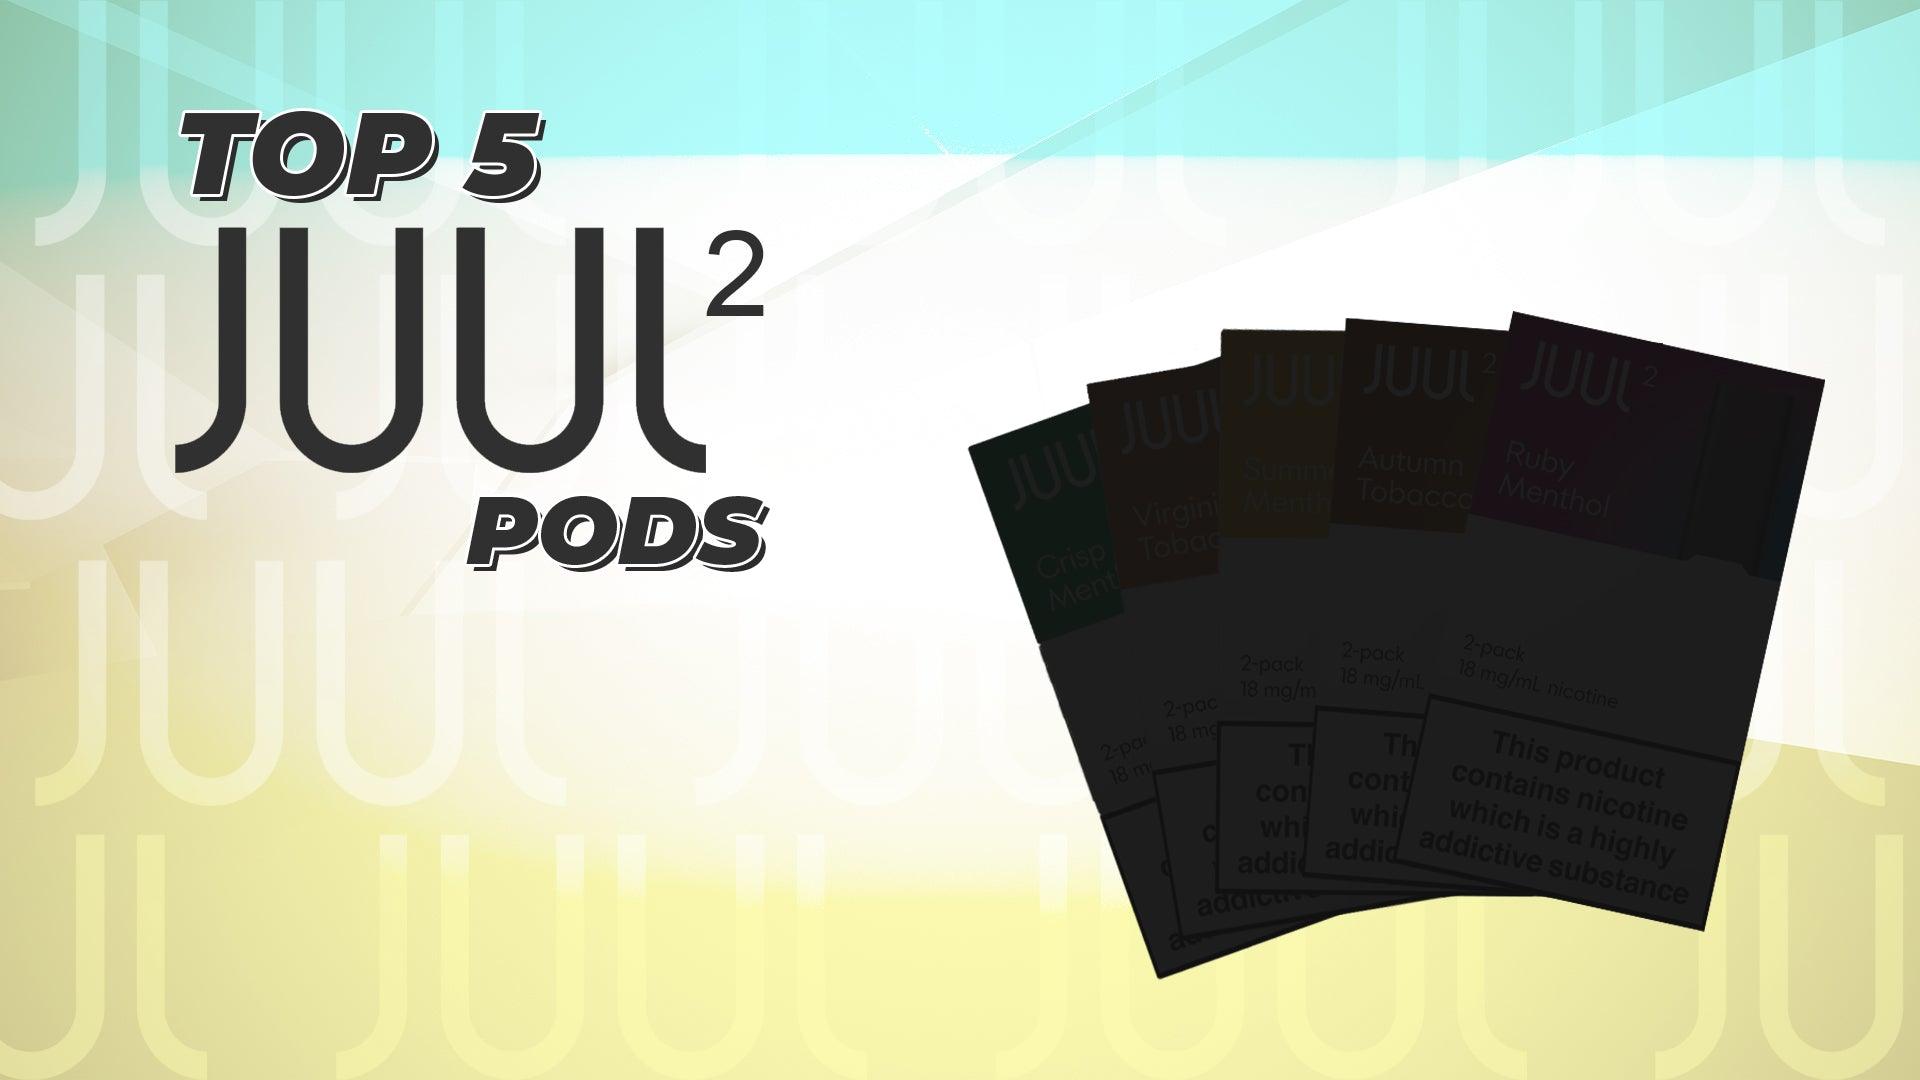 Top 5 Juul2 Pods - Brand:Juul, Category:Pods & Cartridges, Sub Category:Prefilled Pods